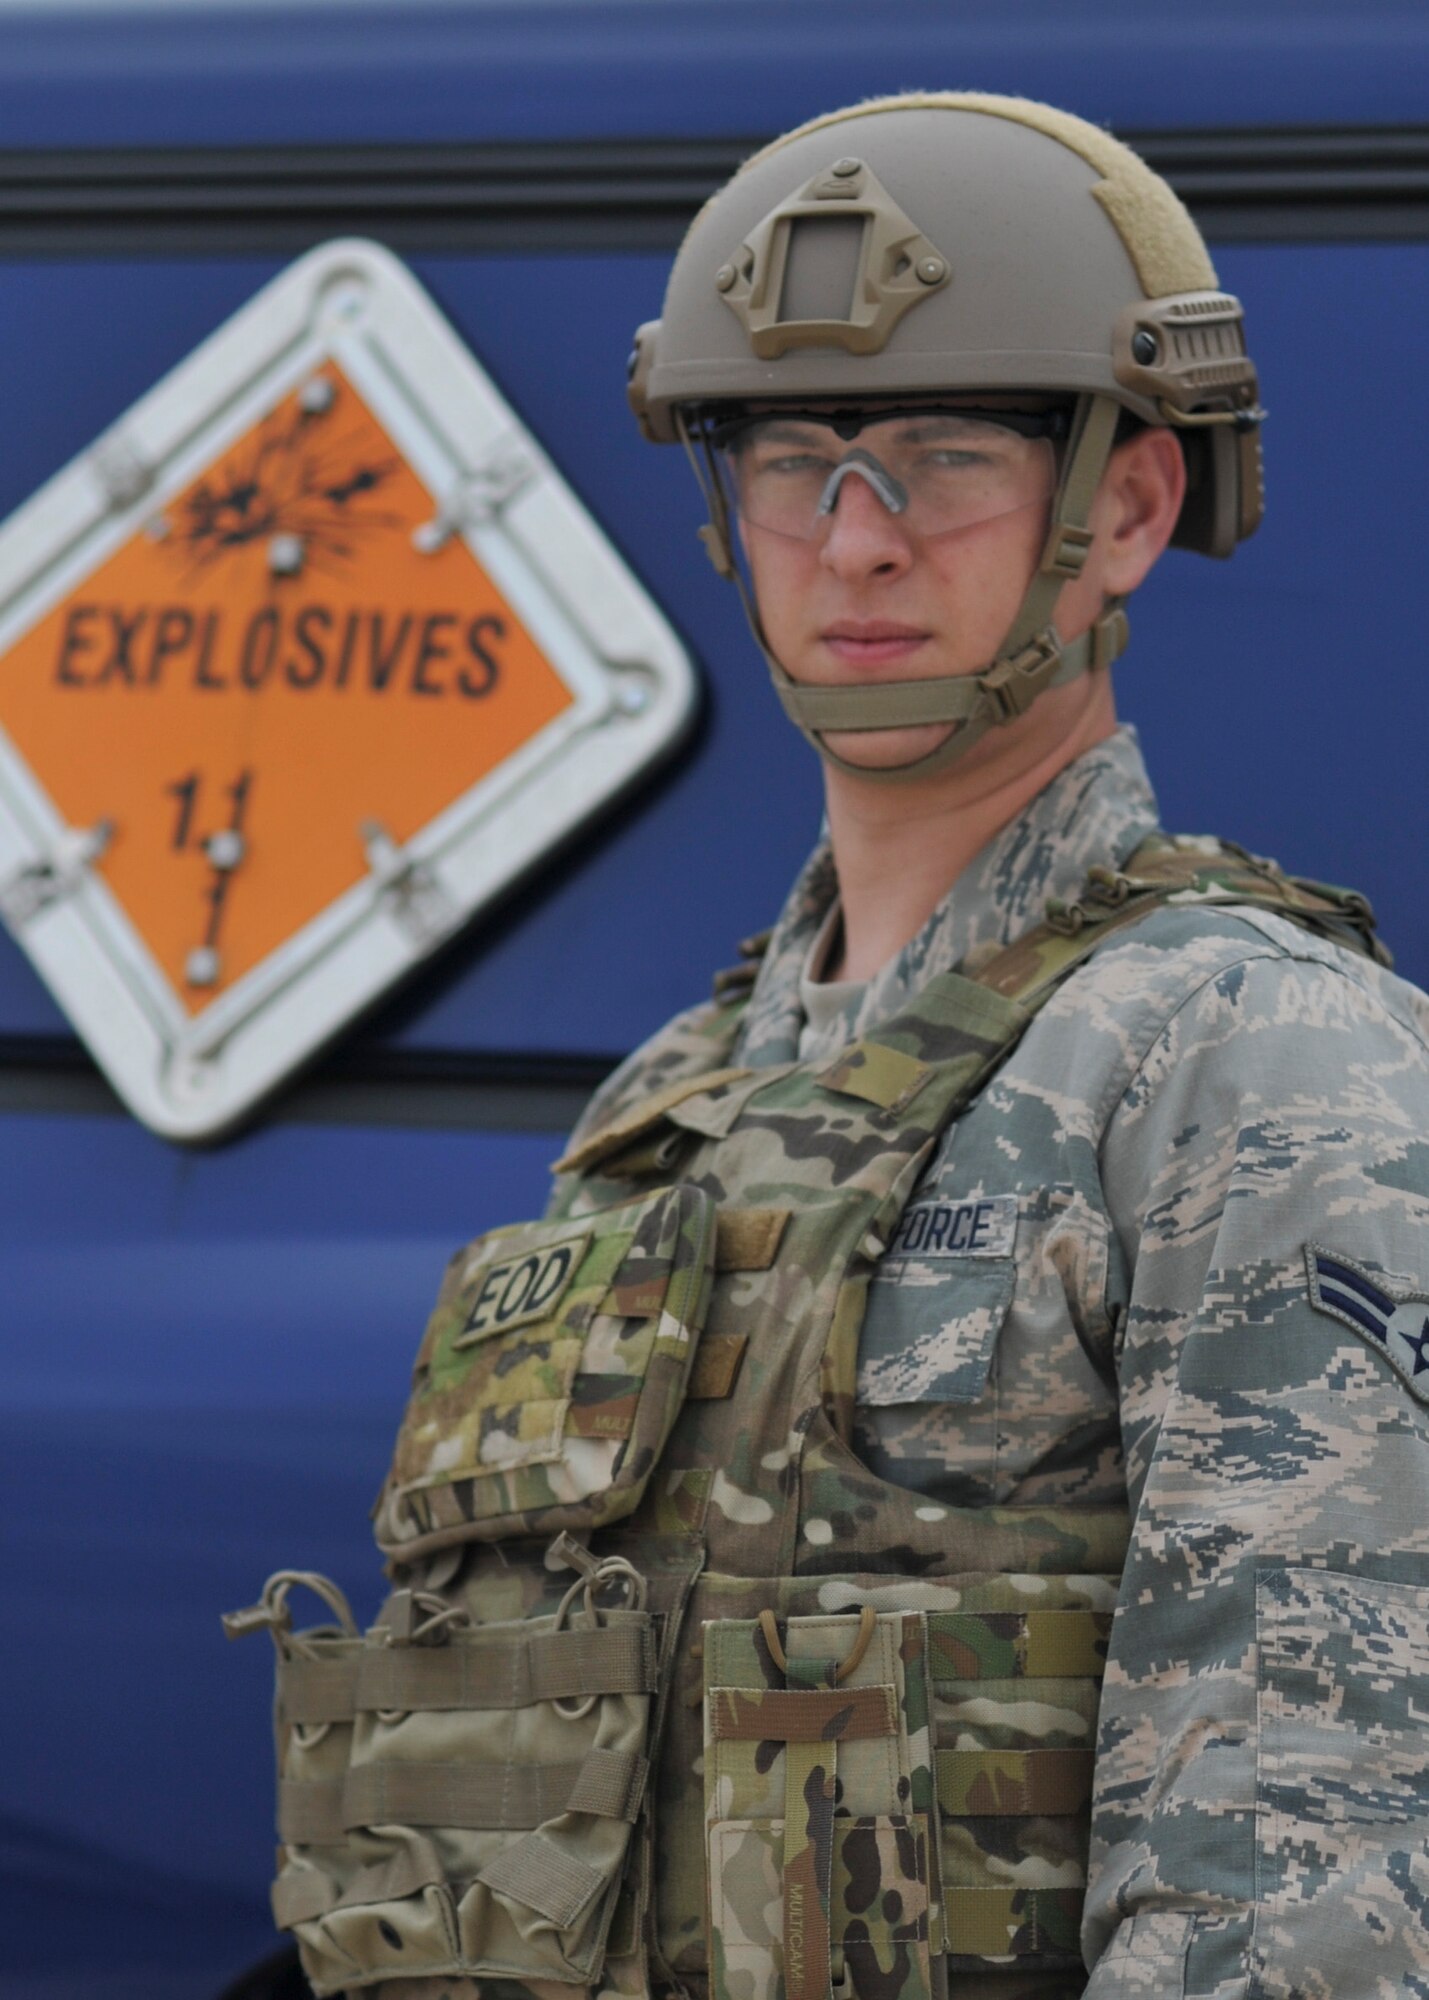 An Airman with the 1st Special Operations Civil Engineer Squadron explosive ordnance disposal stands by an EOD truck at Perdido Key, Fla., March 12, 2014. EOD members disposed of unexploded ordinance on-site when UXOs are unsafe for transport on public roadways. (U.S. Air Force Photo/Staff Sgt. John Bainter)